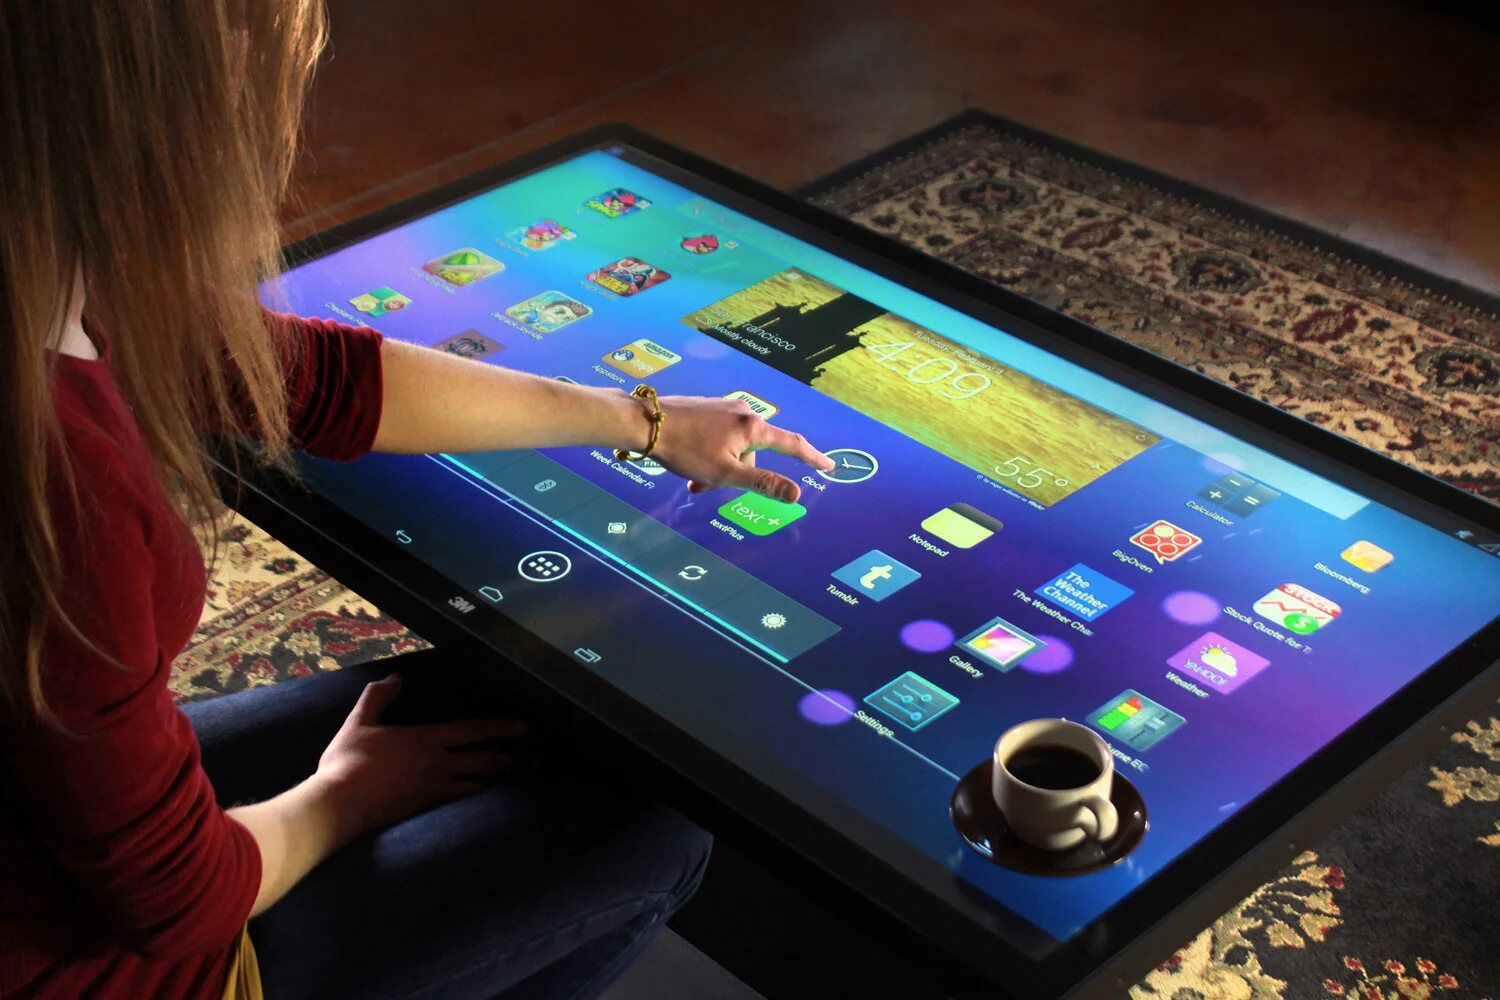 What Is The Largest Size Tablet Available